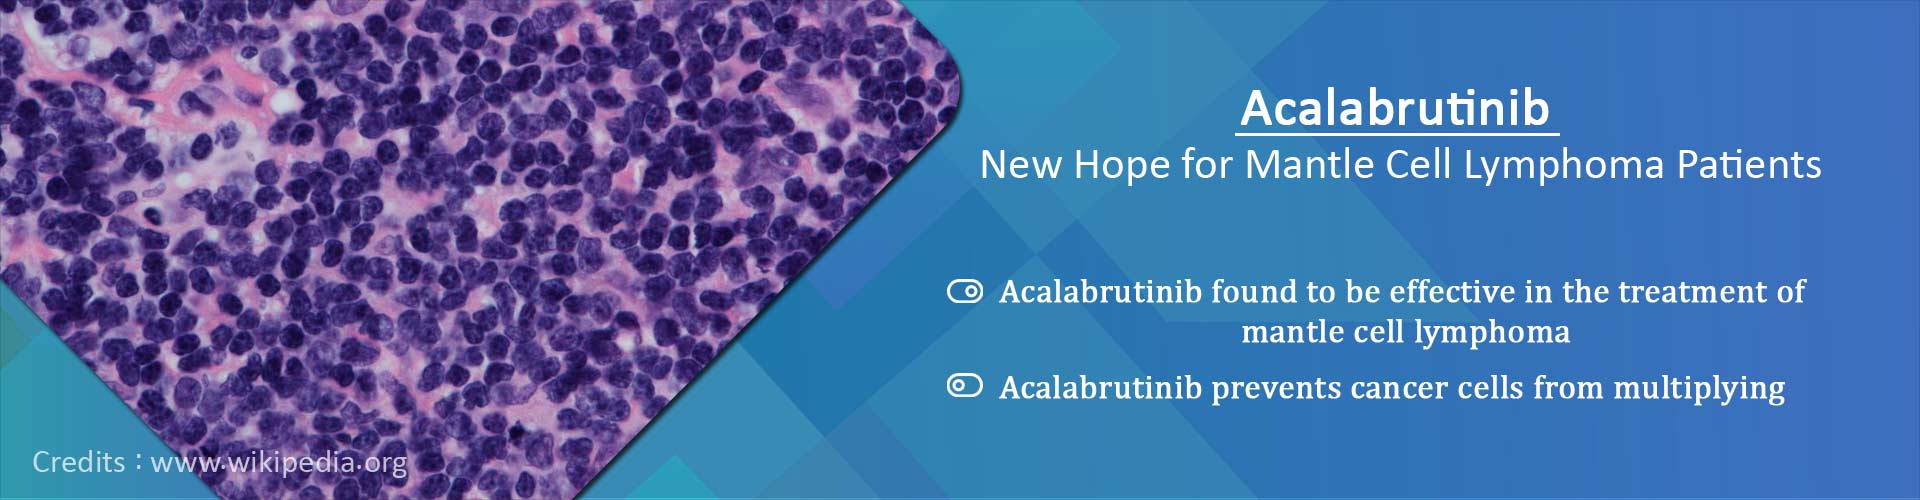 Acalabrutinib - new hope for mantle cell lymphoma patients
- Acalabrutinib found to be effective in the treatment of mantle cell lymphoma
- Acalabrutinib prevents cancer cells from multiplying